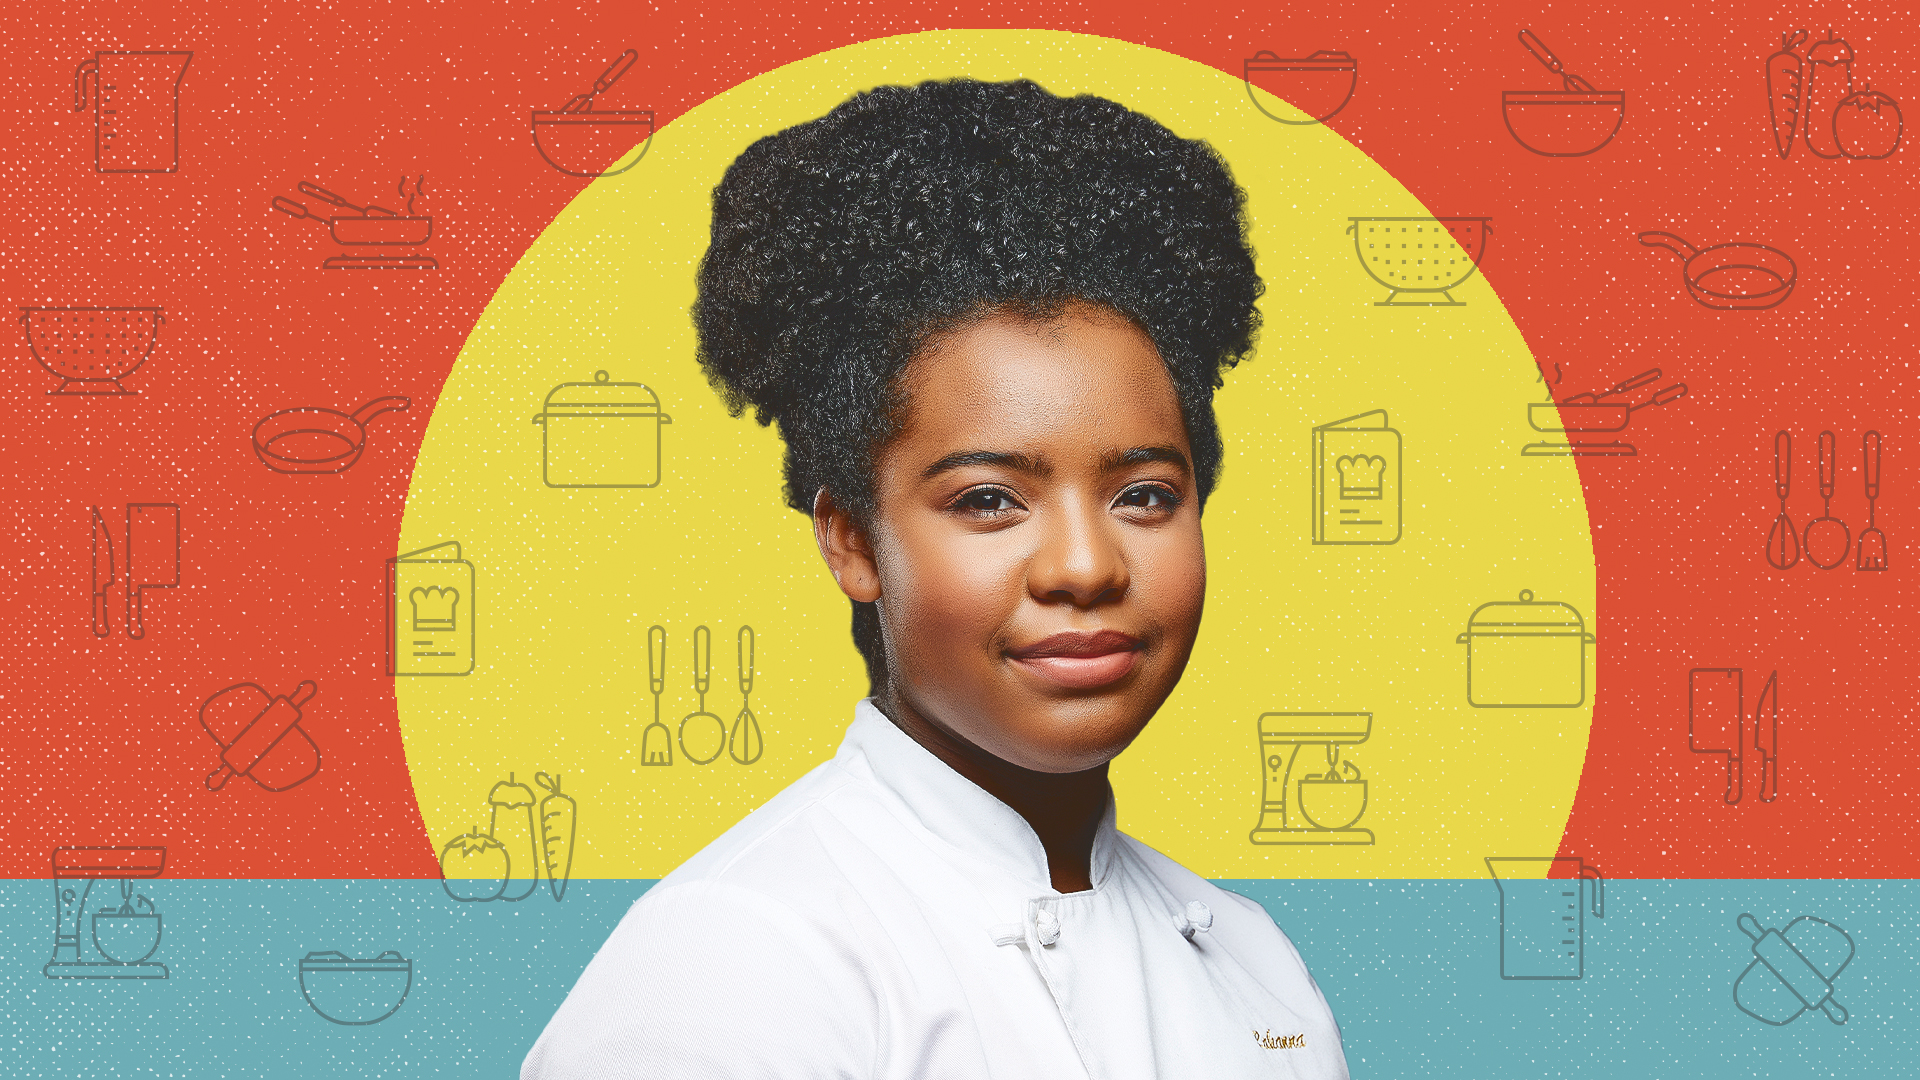 Rahanna Bisseret Martinez wearing a chef's coat, on a background with icons of cooking gear